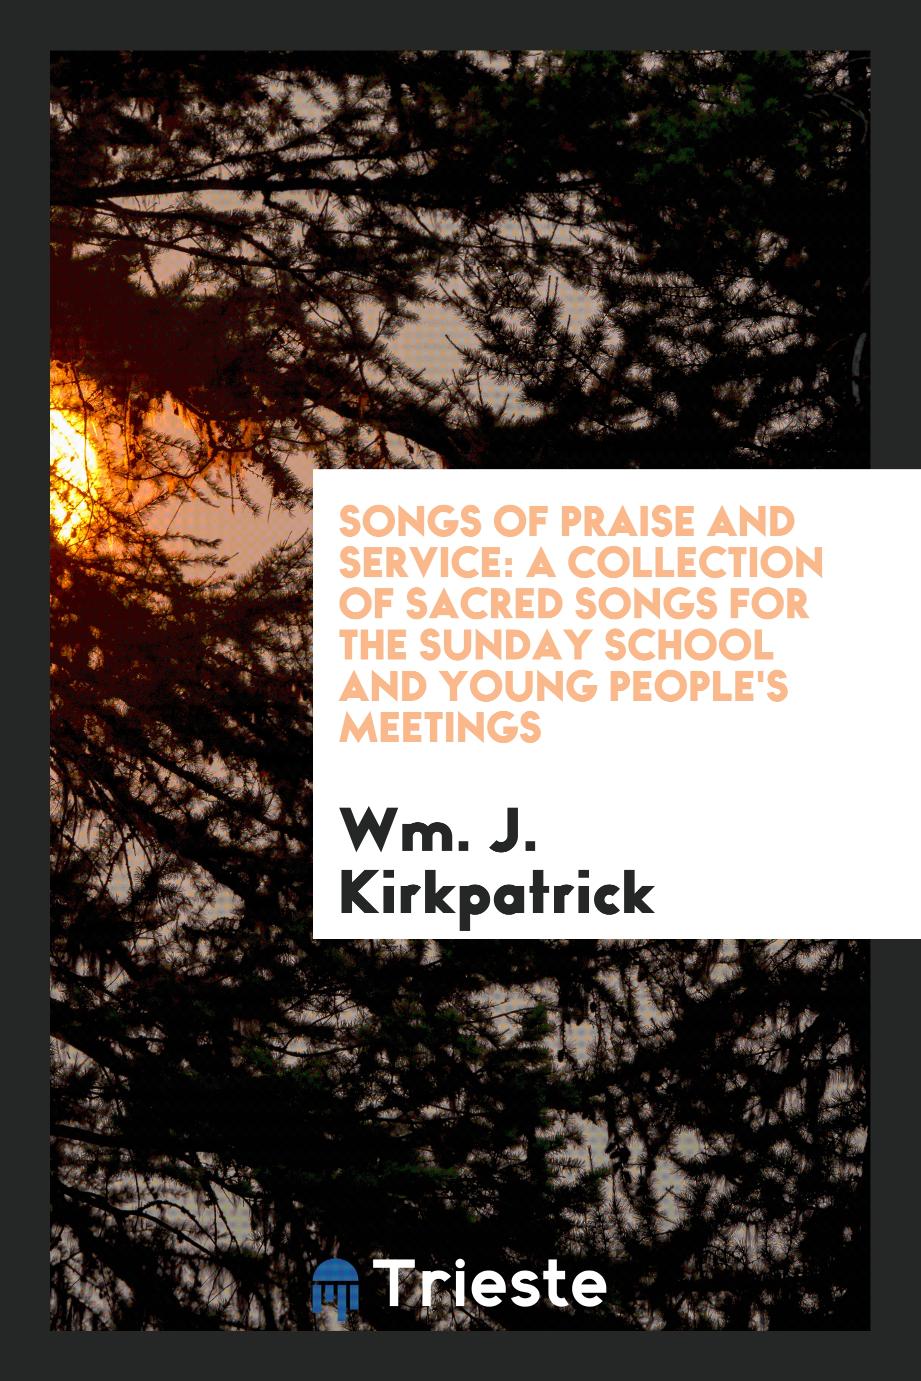 Songs of Praise and Service: A Collection of Sacred Songs for the Sunday School and Young People's Meetings